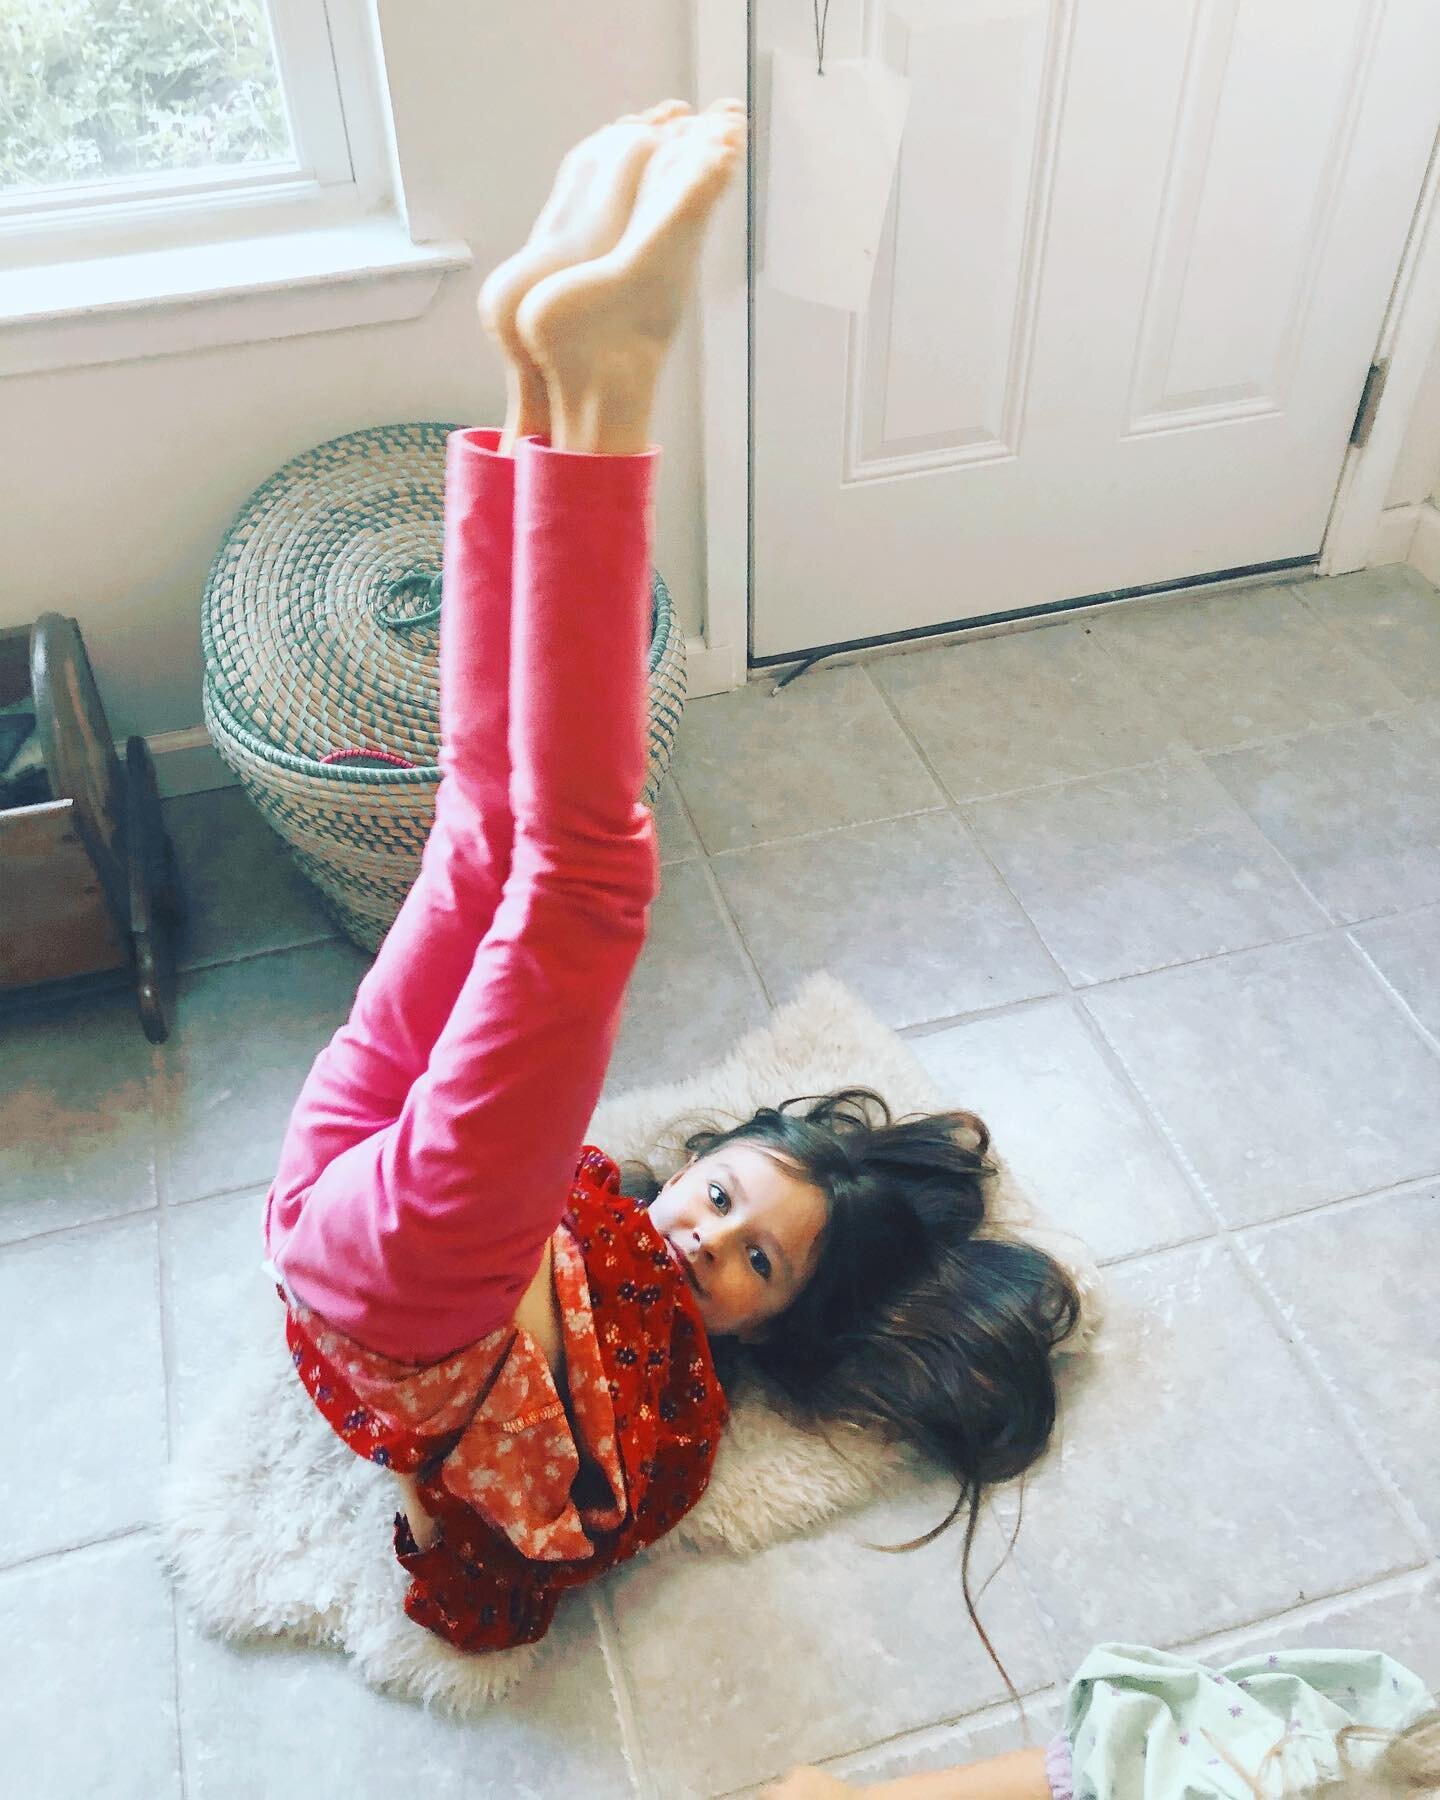 Fact! Yoga babies turn into exquisite yogini&rsquo;s in just 7 years #birthyourcoven #yogababy #yogakids #yogahomeschool